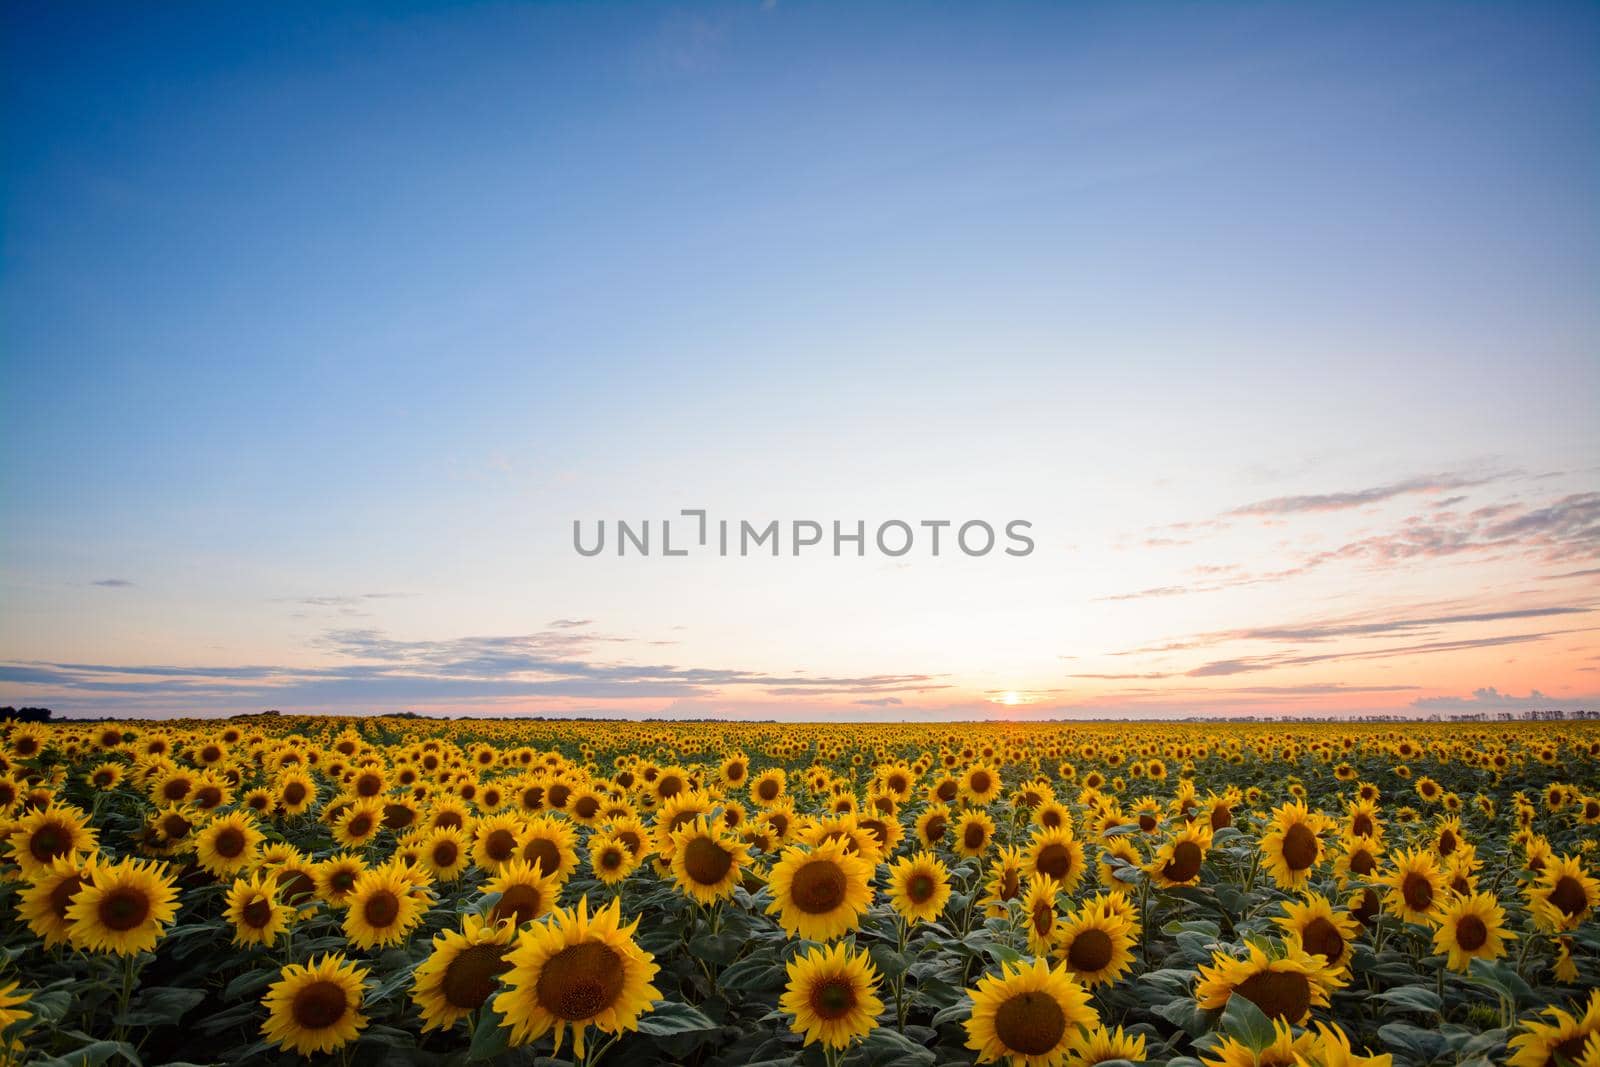 Golden sunflower plants at sunset in the countryside